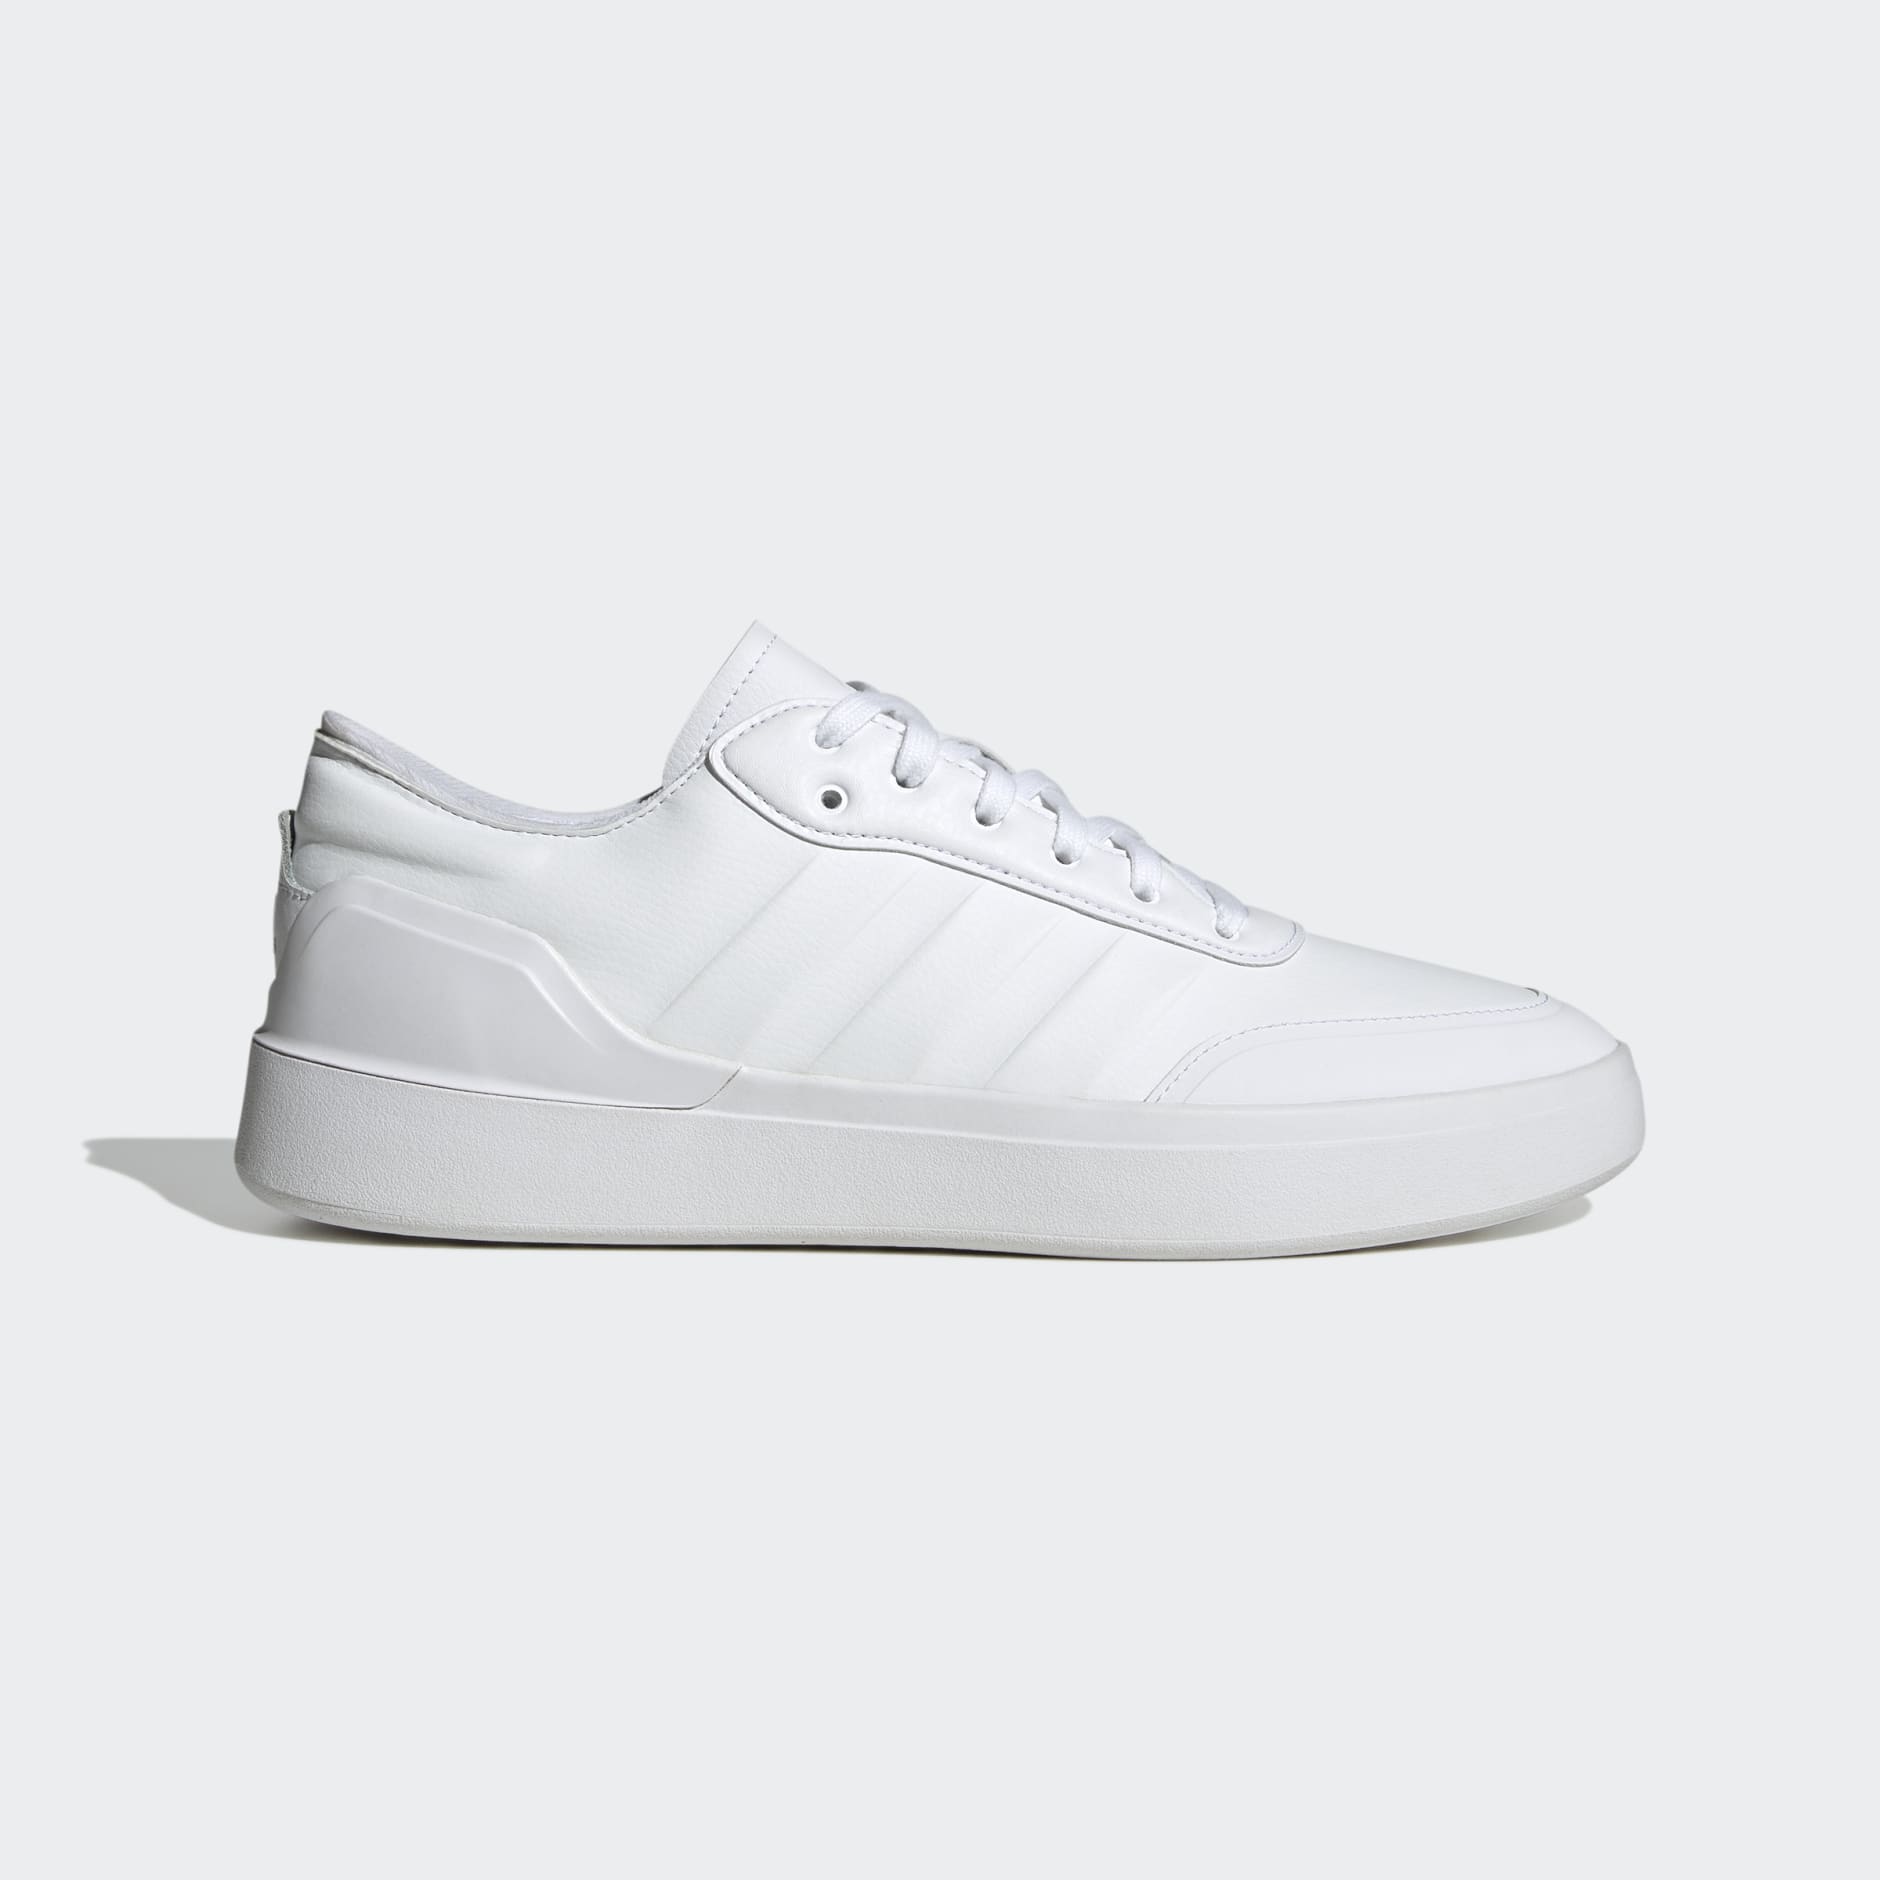 adidas Court Revival Shoes White adidas KW